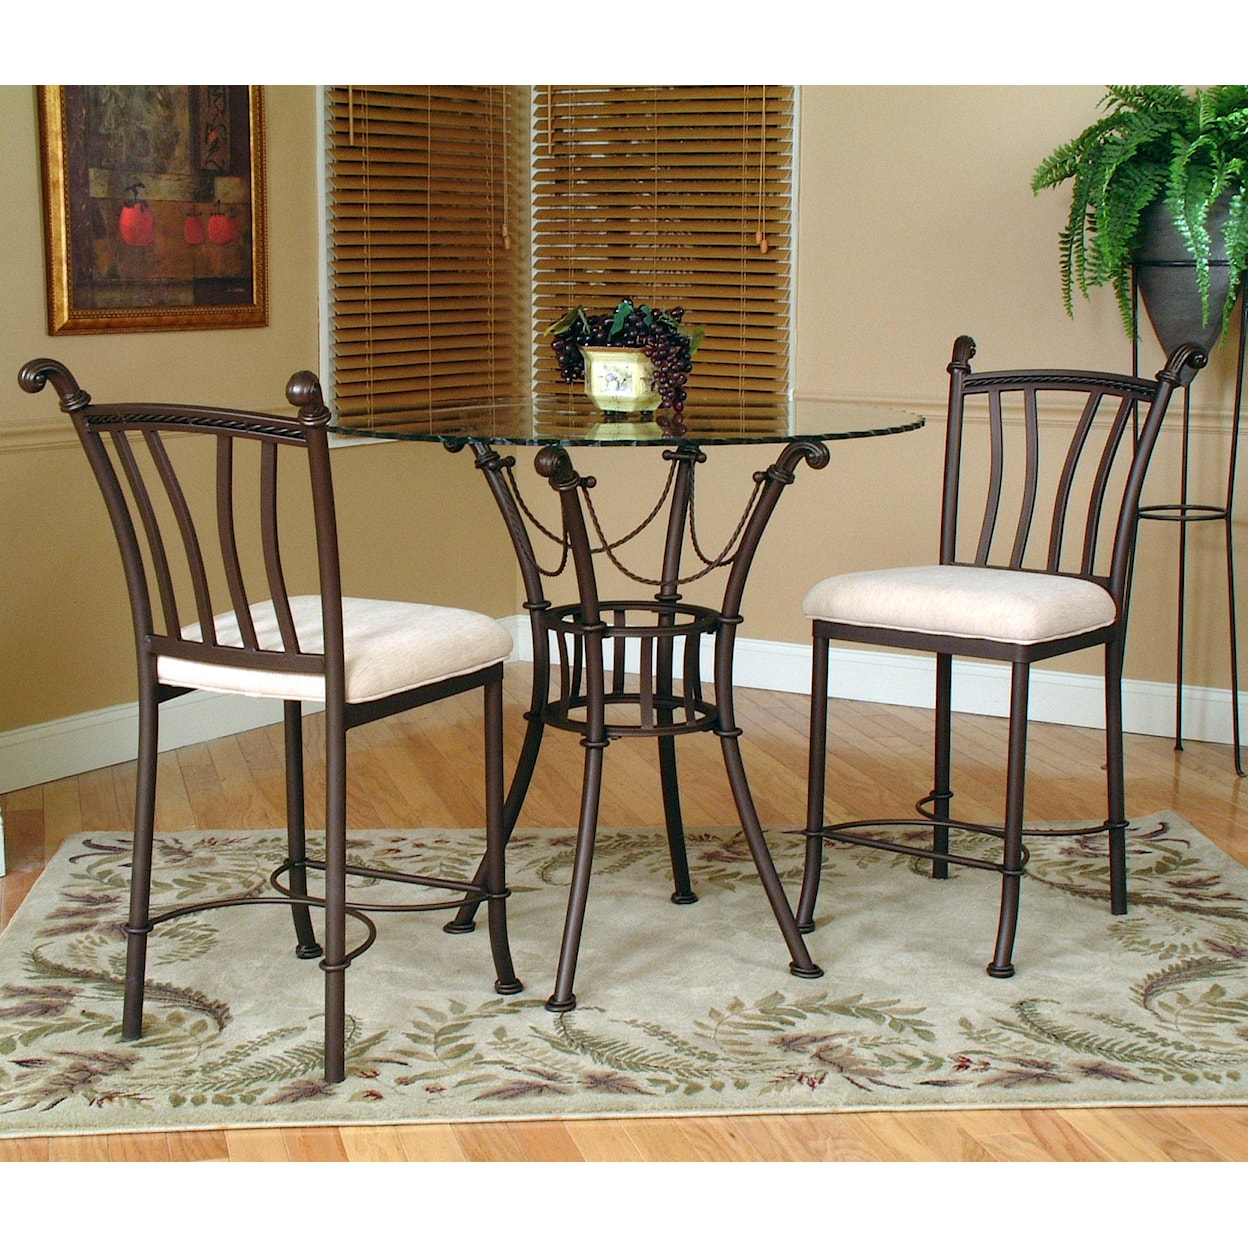 Cramco, Inc Denali 3 Piece Counter Height Glass Table and Chair